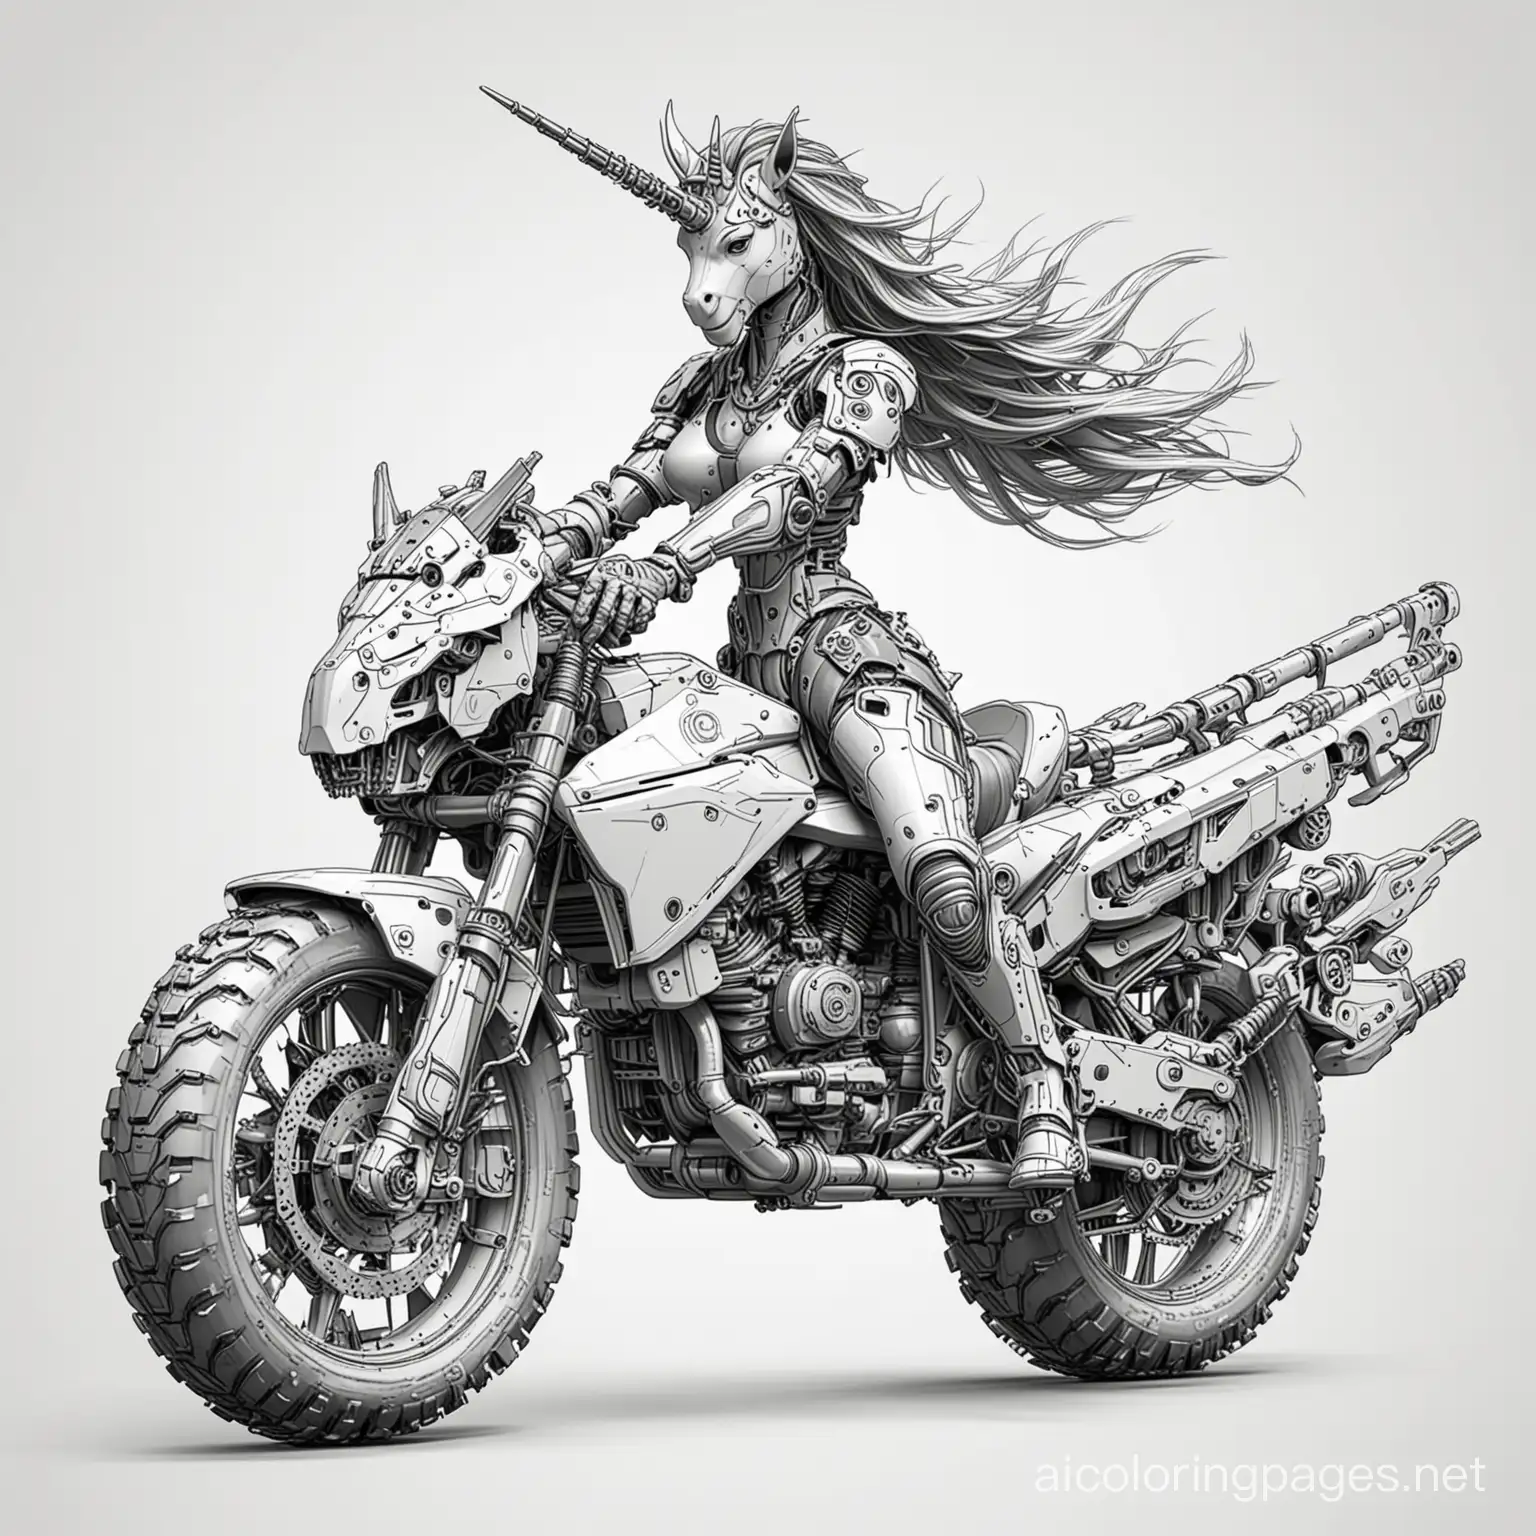 Cybernetic-Unicorn-Warrior-Coloring-Page-with-Large-Guns-and-Motorcycle